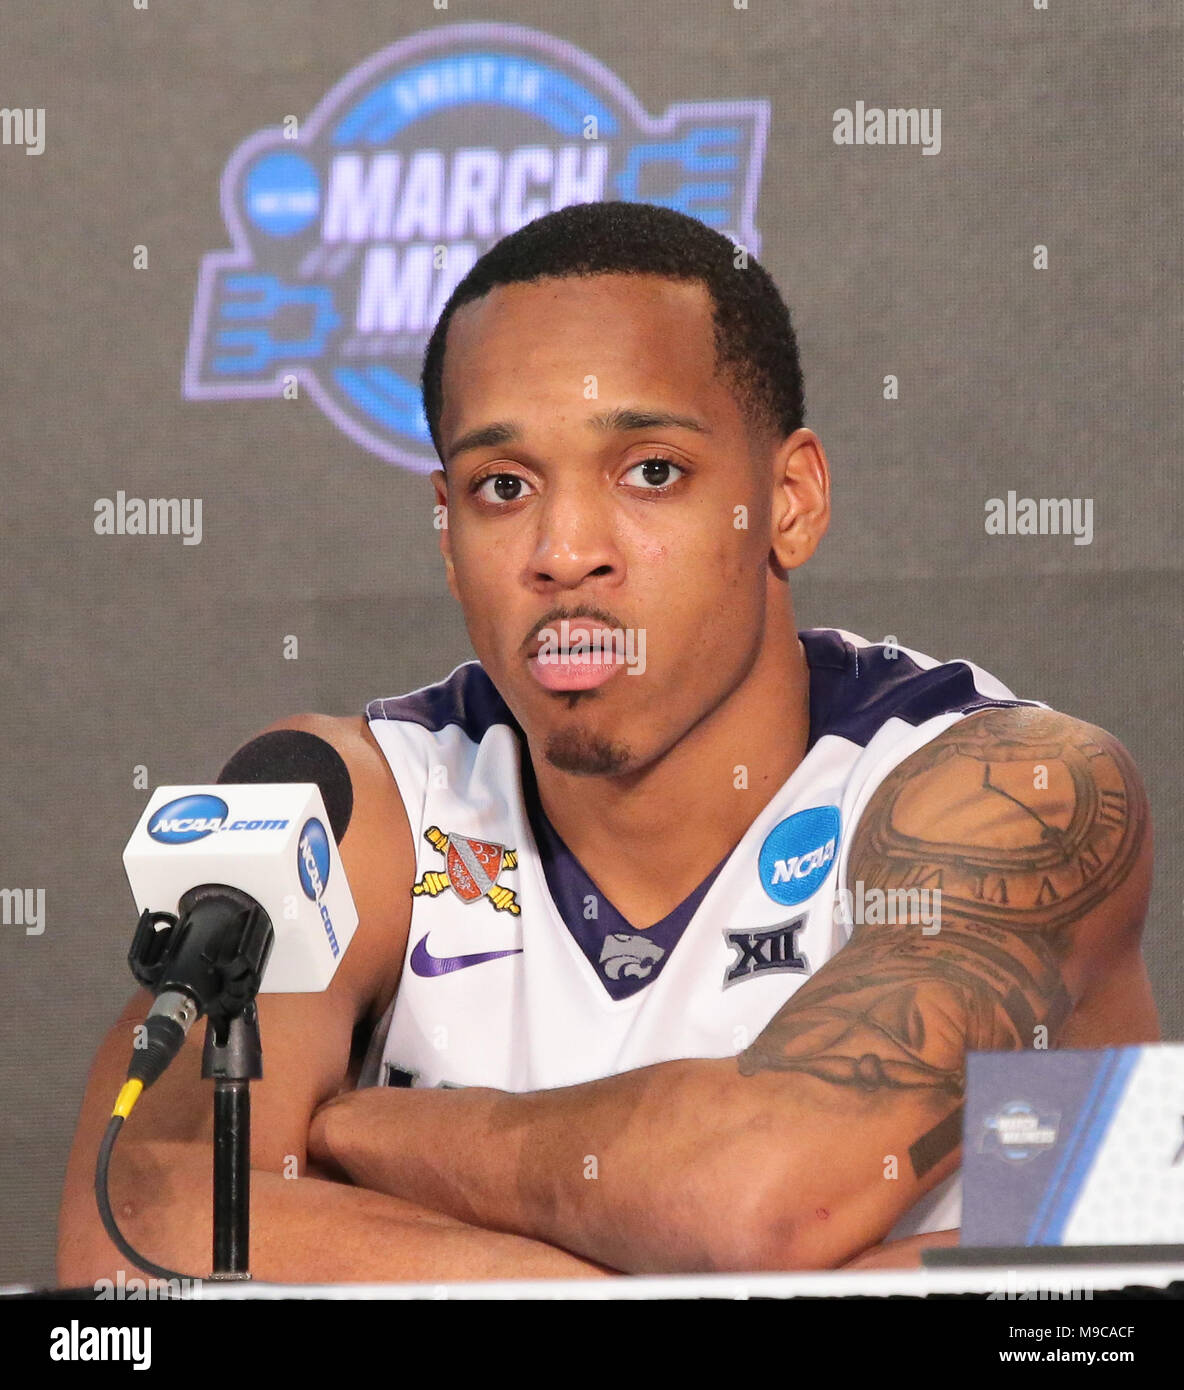 ATLANTA - MAR 24: Kansas State Wildcats guard Barry Brown Jr (5) speaks to the media after the Elite 8 game against the Loyola-Chicago Ramblers at Philips Arena on March 24, 2018 in Atlanta, Georgia. Loyola-Chicago won 78-62 to advance to the Final Four. Stock Photo